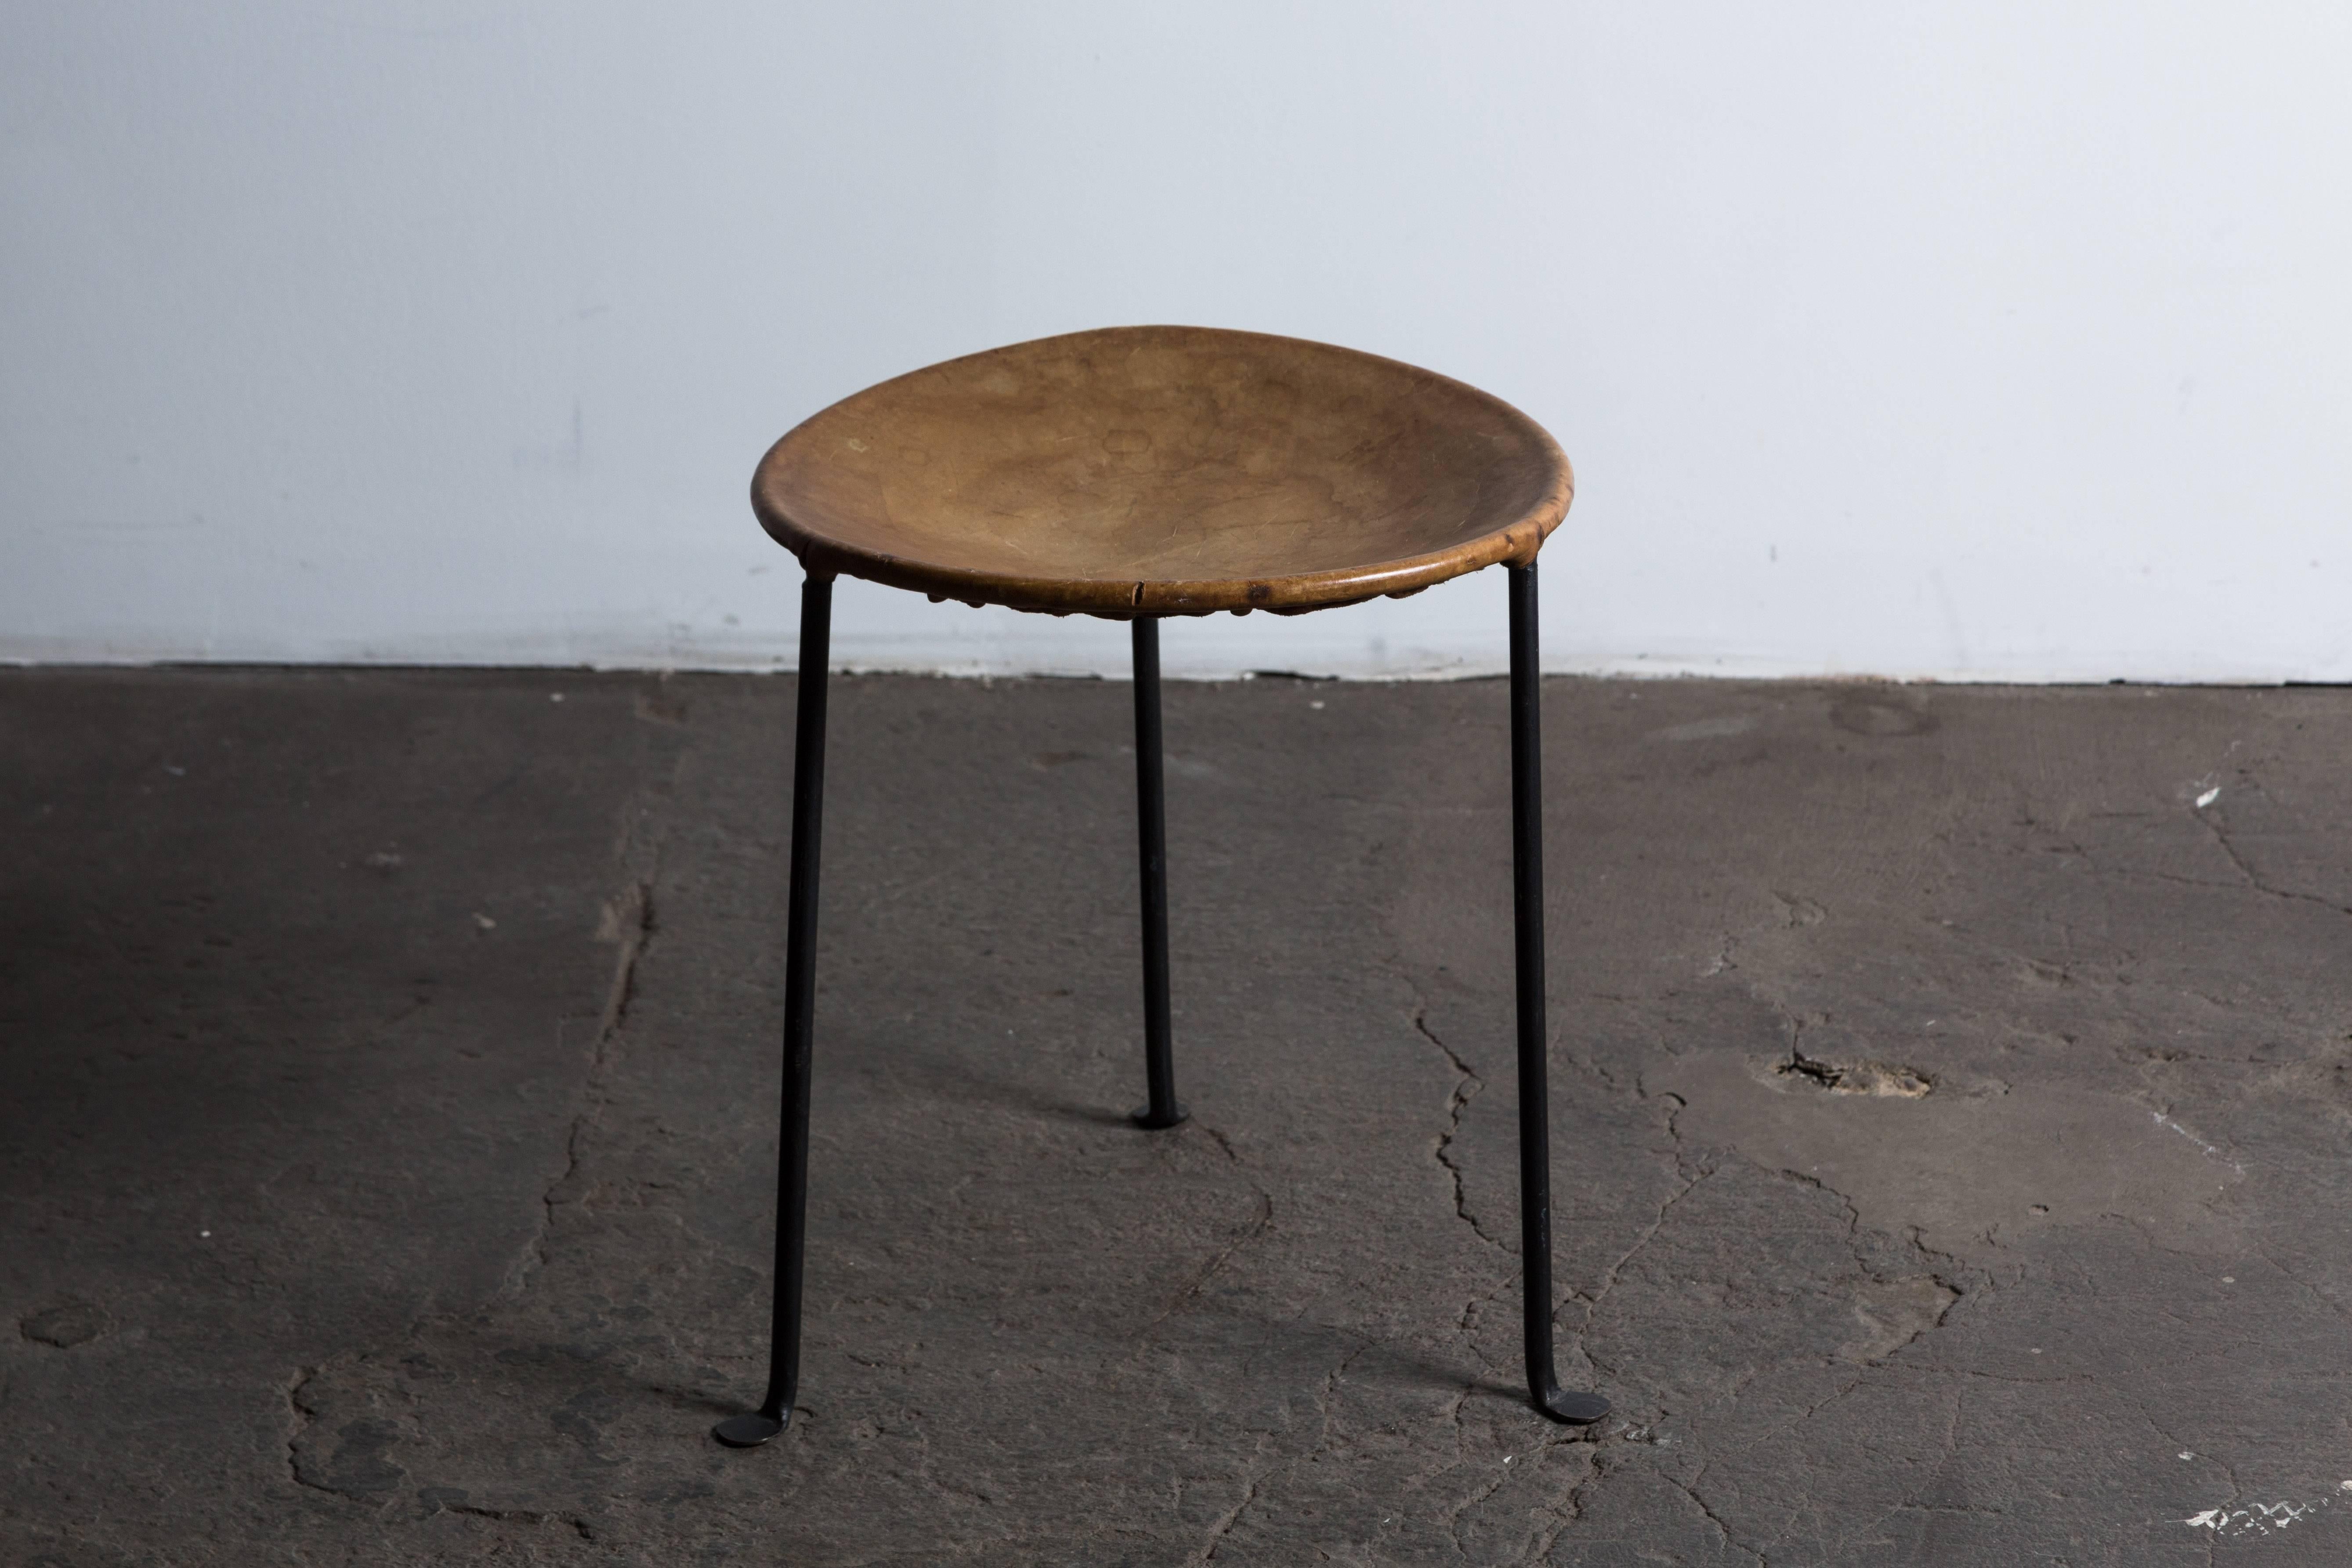 Hand-wrought iron stool with patinated leather seat by Lila Swift and Donald Monell. Made in USA, circa 1950s.